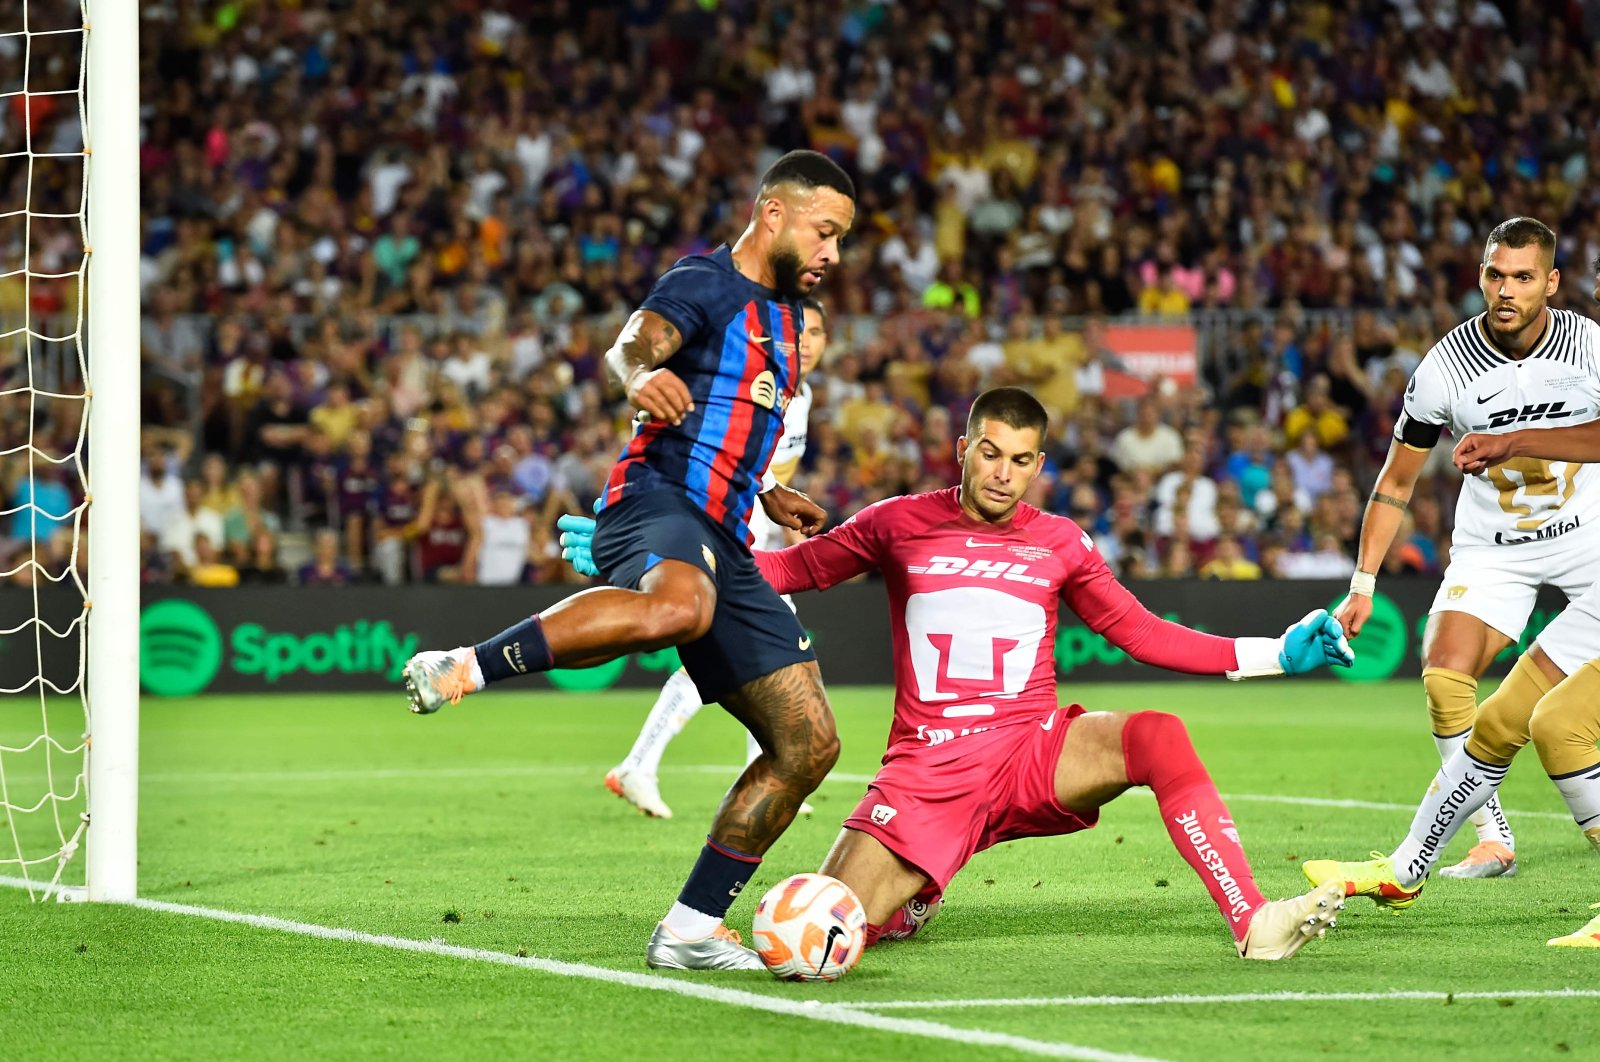 Barcelona&#039;s Memphis Depay (L) fights for the ball during a game against Pumas, in Barcelona, Spain, Aug. 7, 2022. (AFP PHOTO)